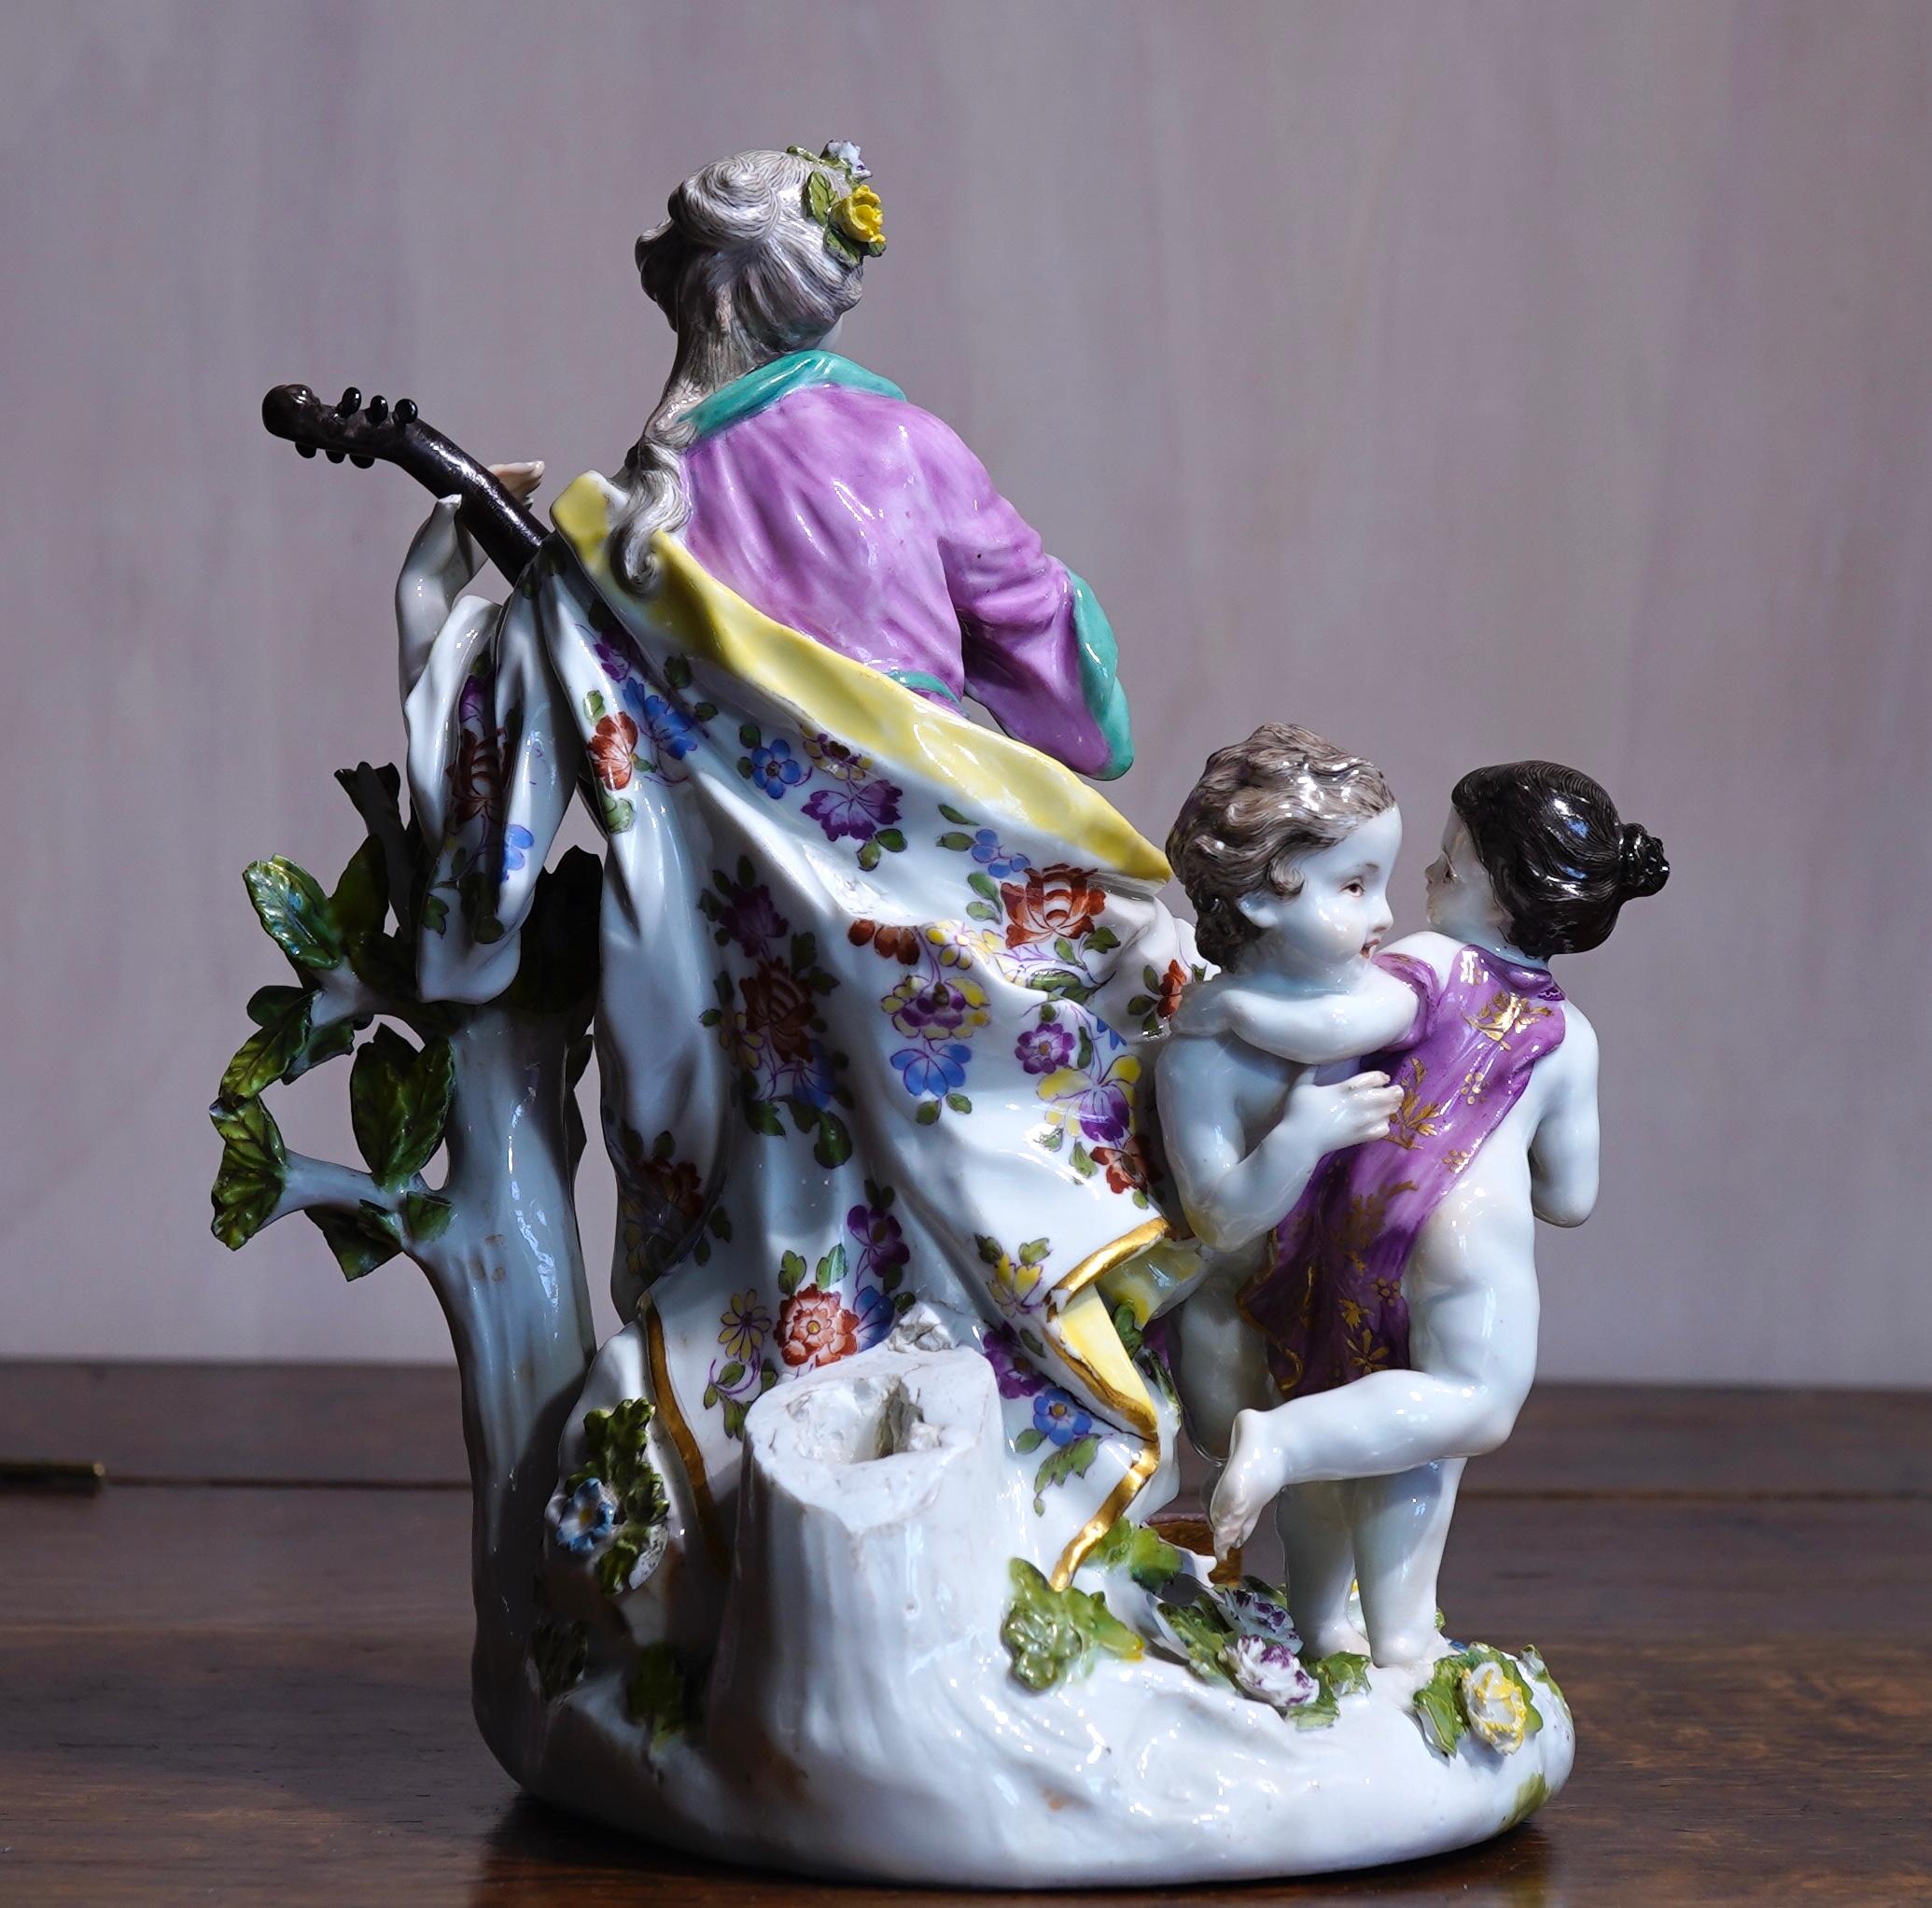 Meissen group of large size, depicting Terpsichore, the muse of dance and lyrical poetry, from a series of the nine Greek muses (the daughters of Zeus), depicted seated on a rocky outcrop playing a large lute, a book and bagpipes at her feet, a